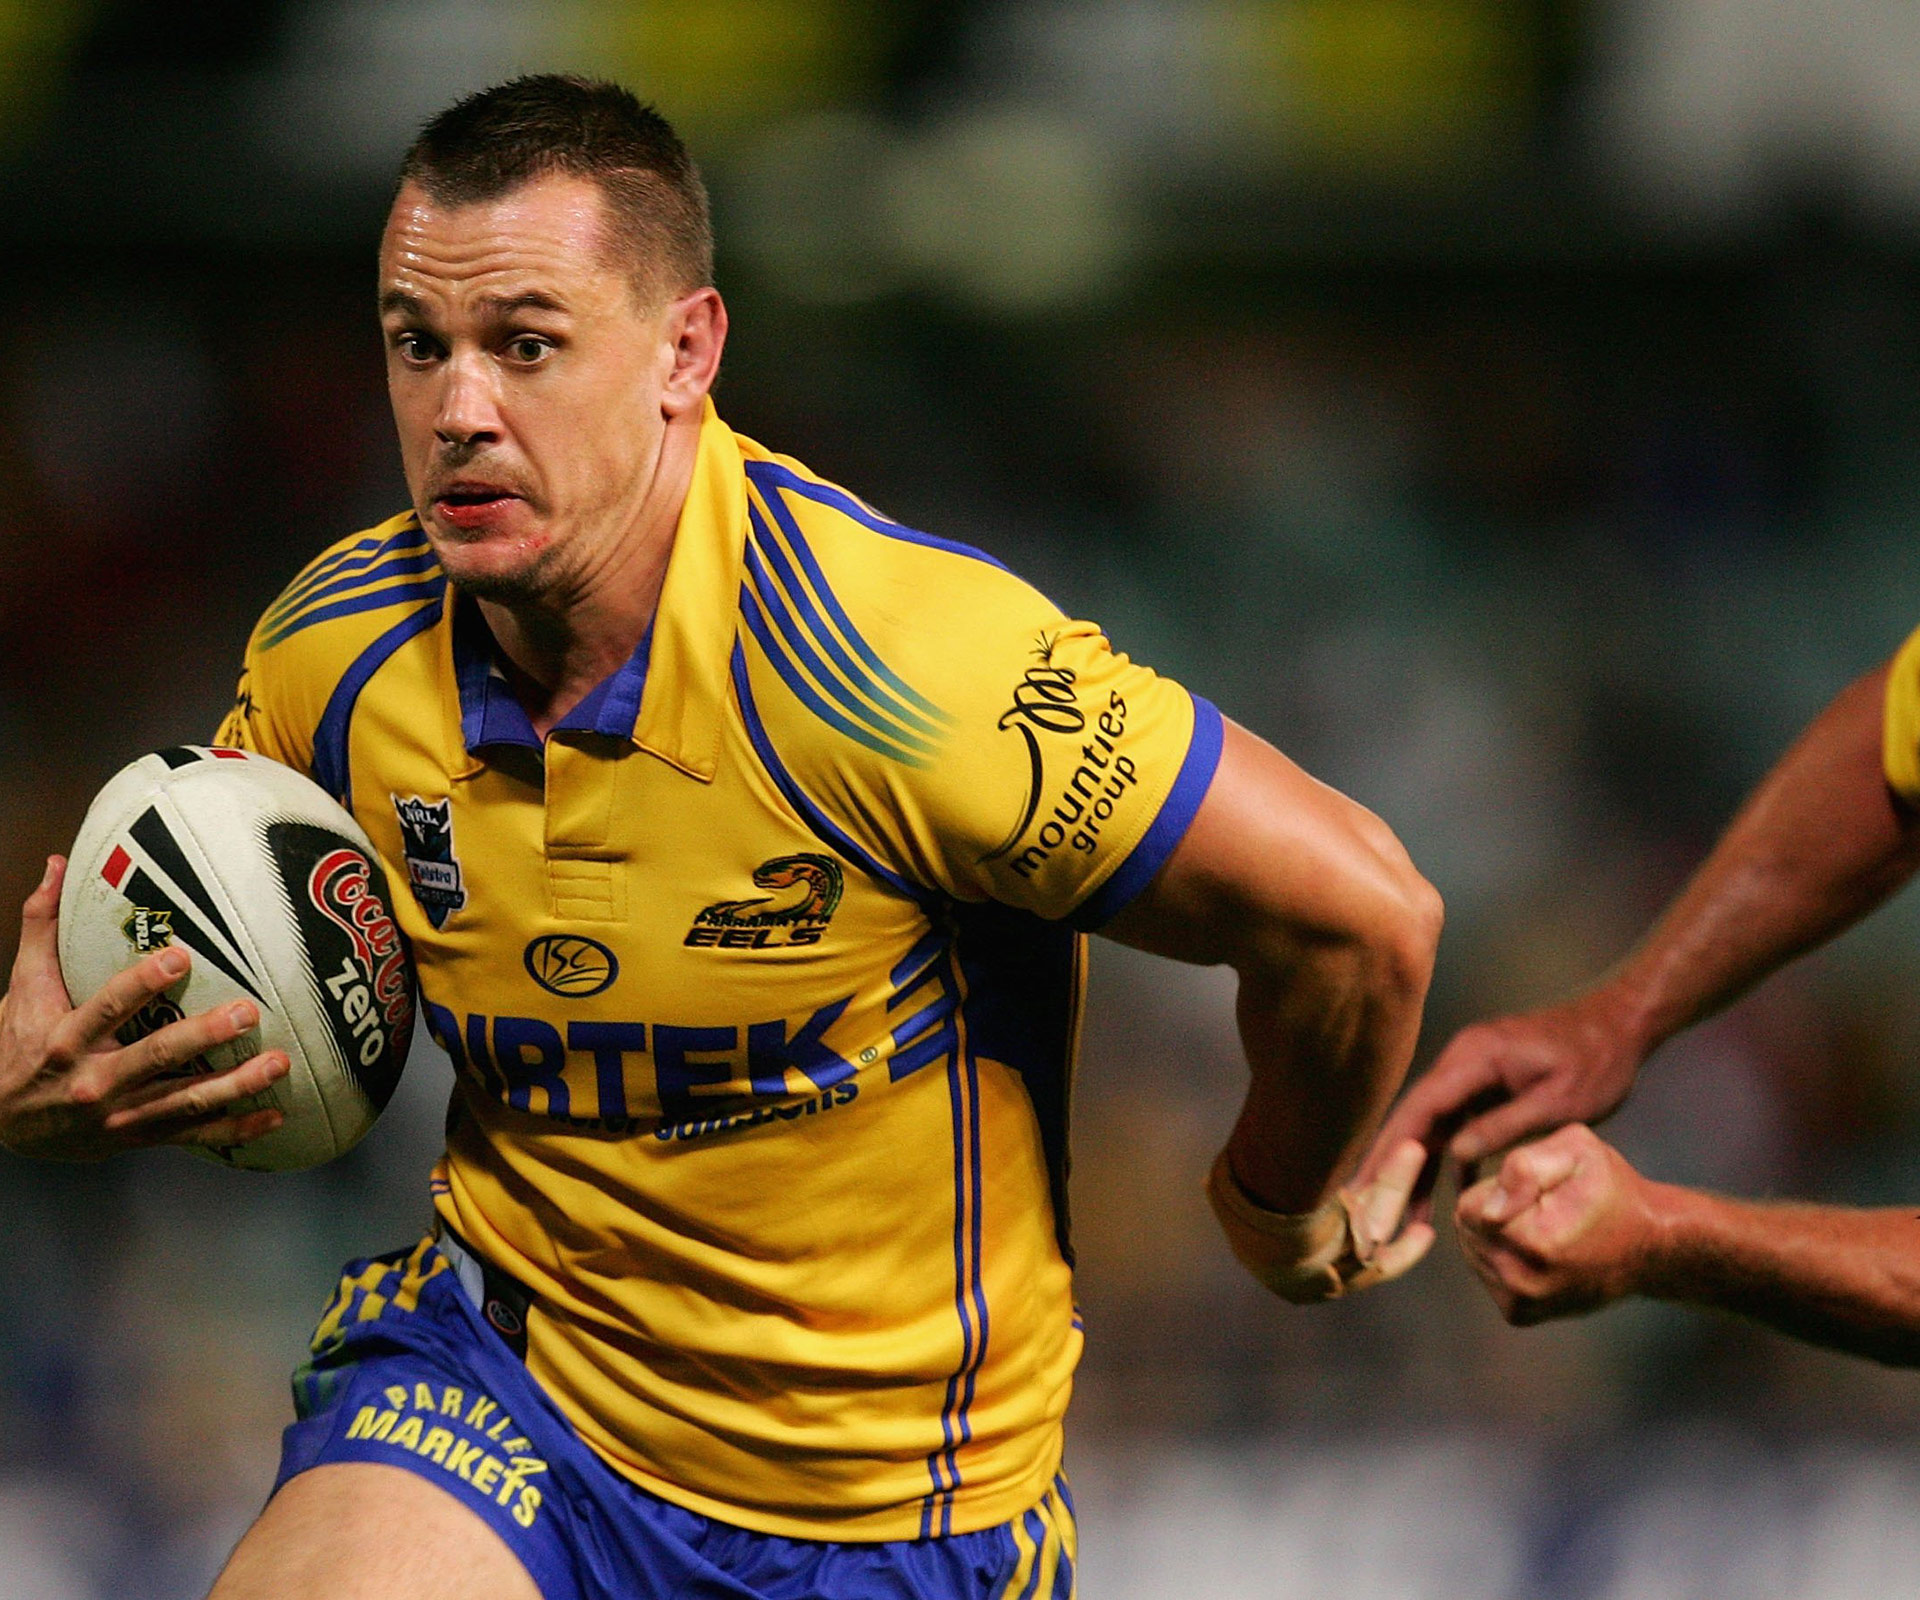 Chad Robinson playing for the Parramatta Eels